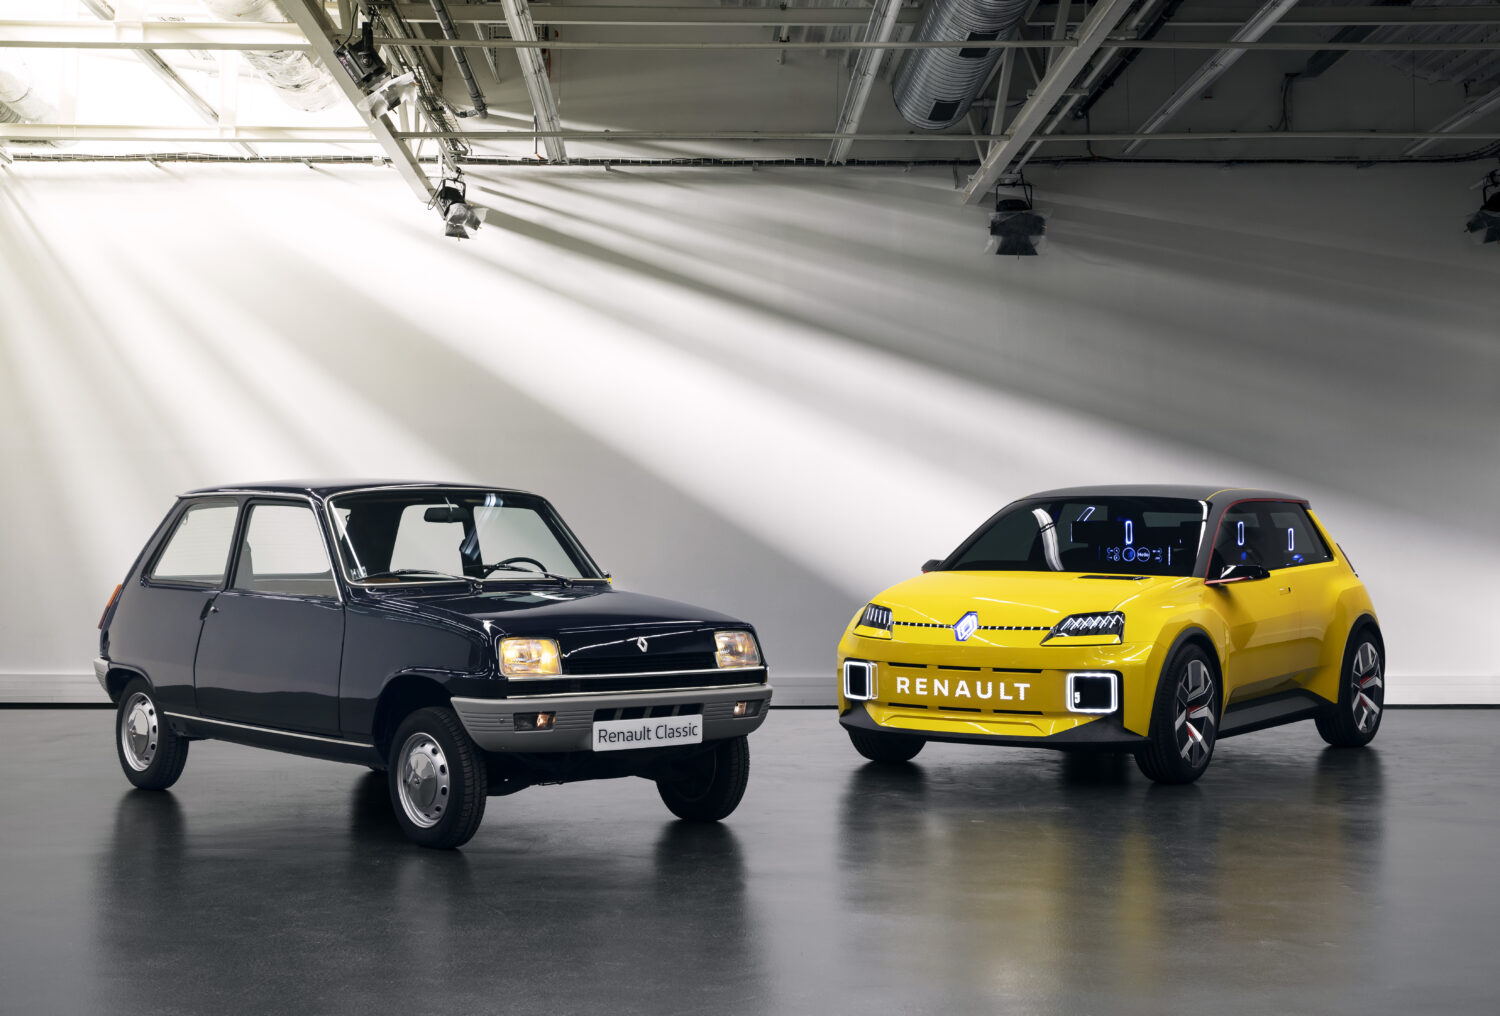 2021 - RENAULT 5 PROTOTYPE AND RENAULT 5 TL